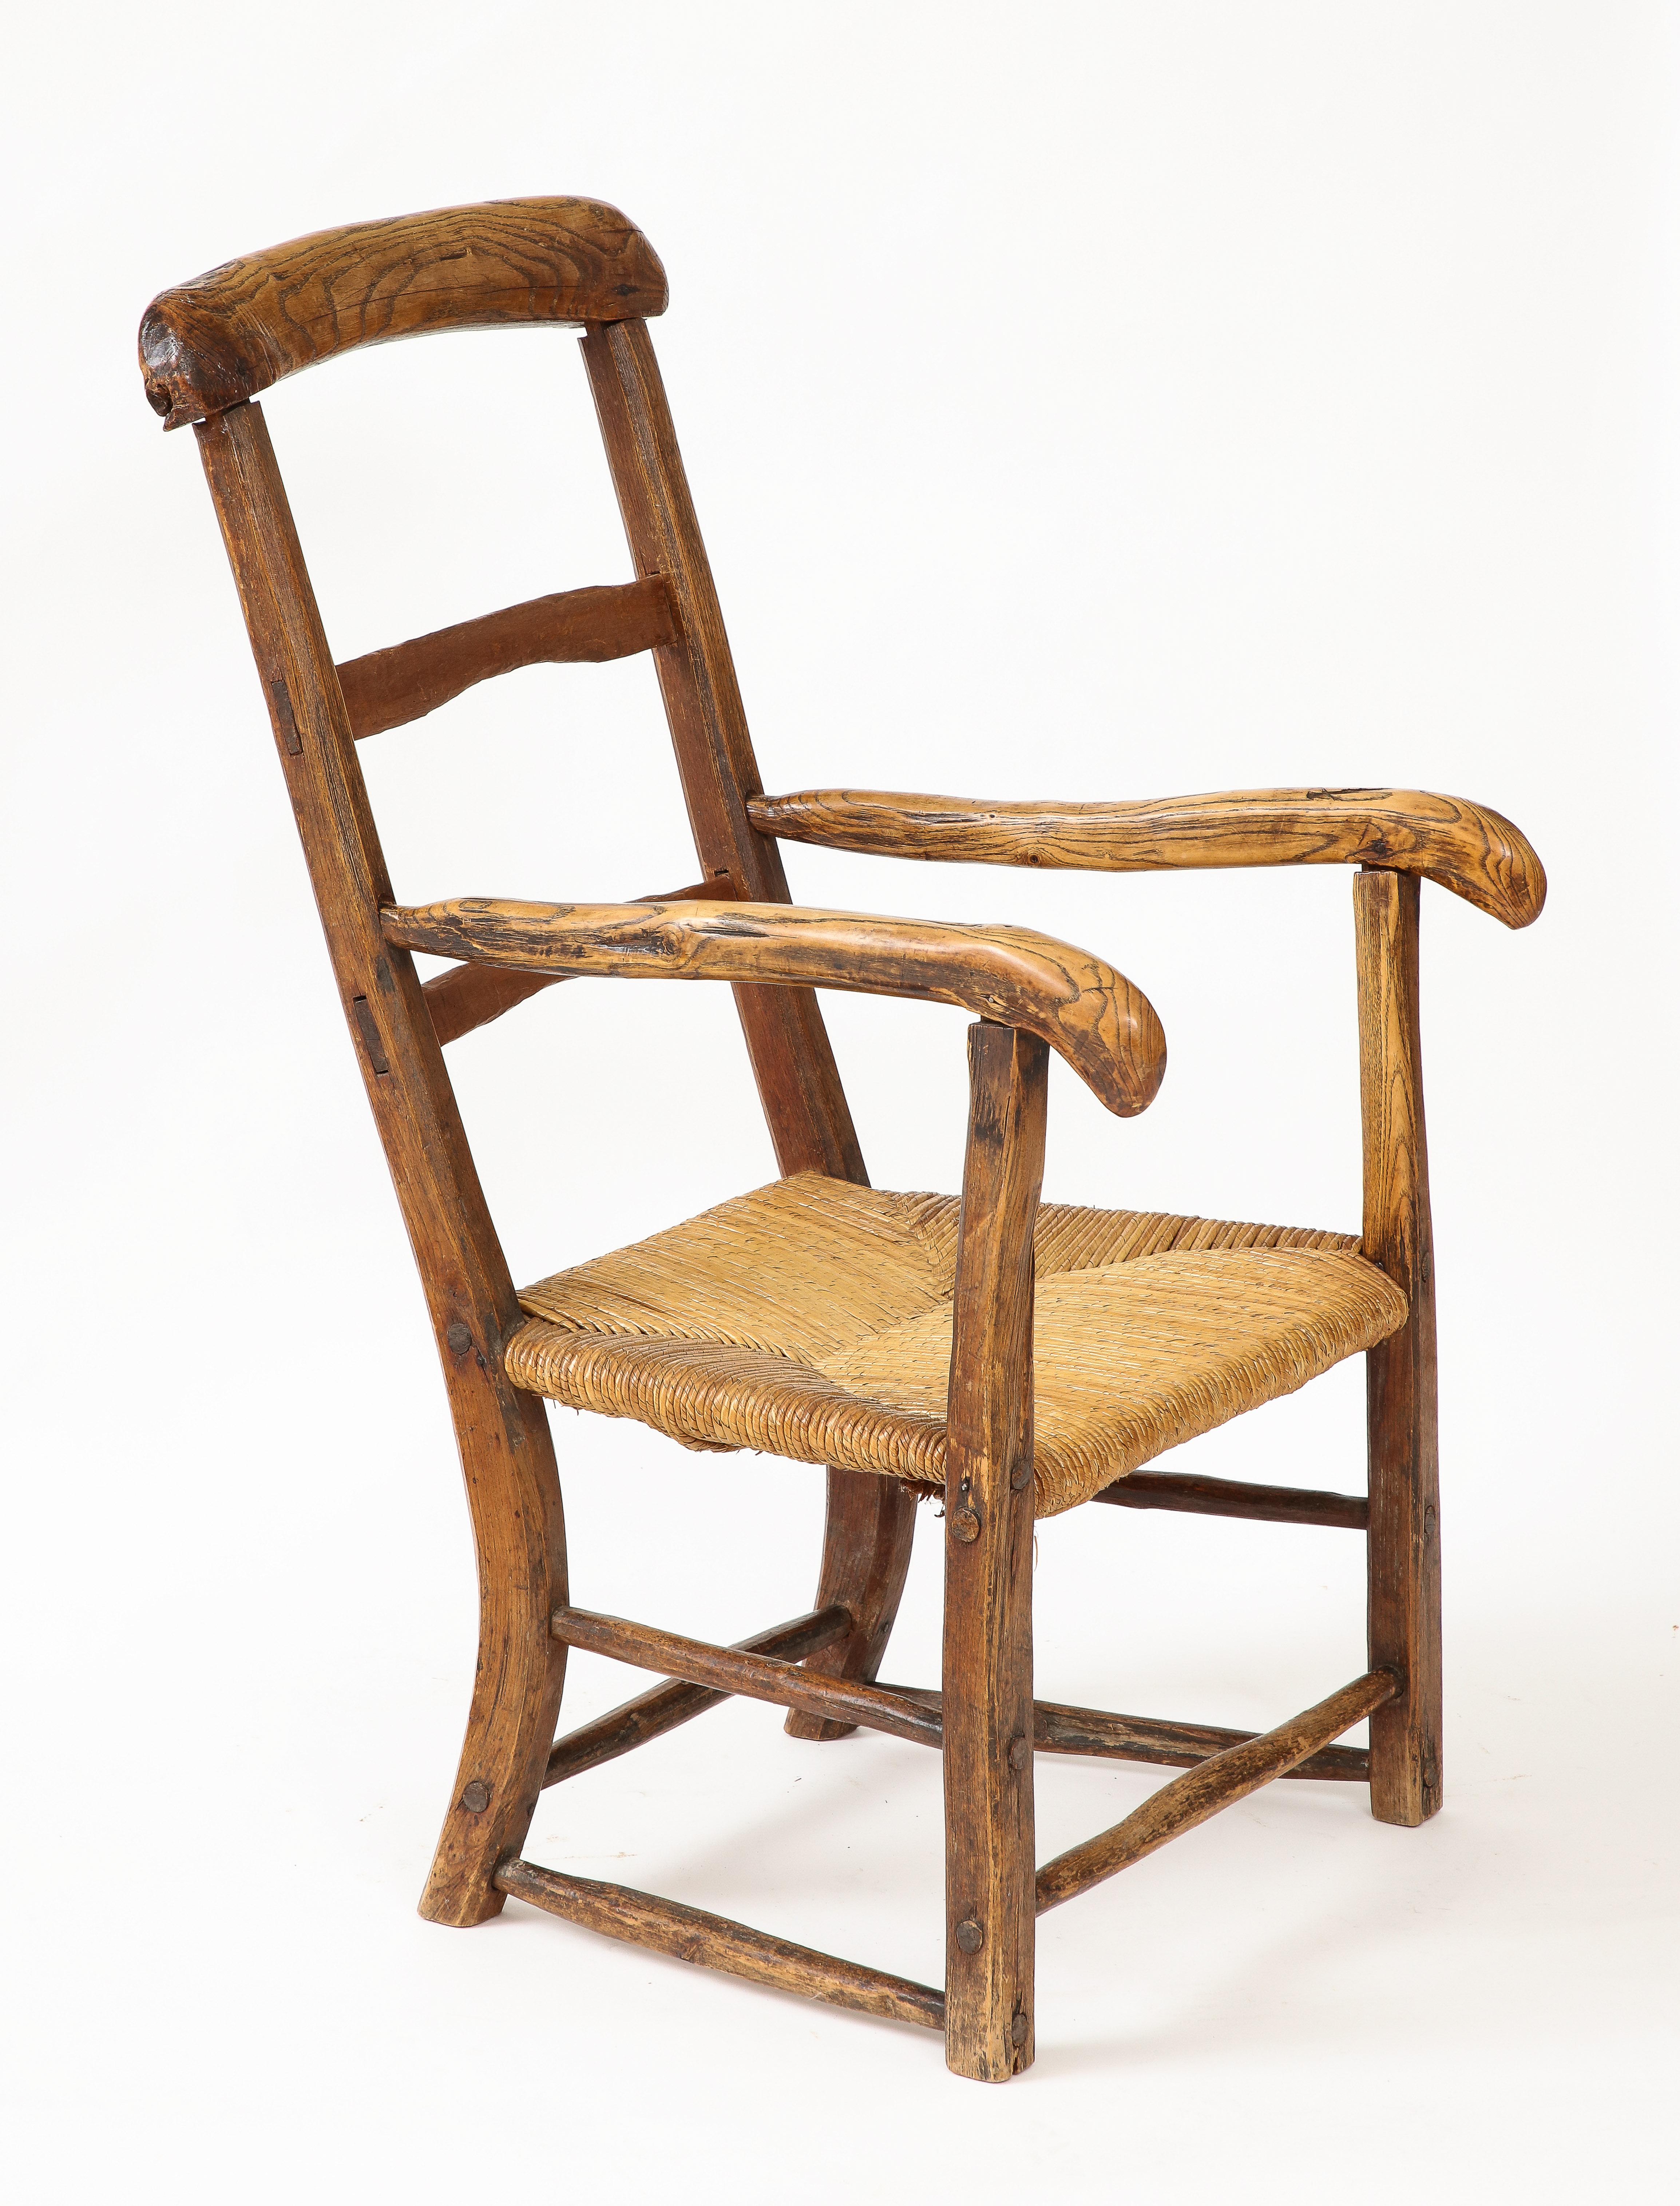 Hand-Crafted 19th Century Rustic French Chair with Straw Seat For Sale